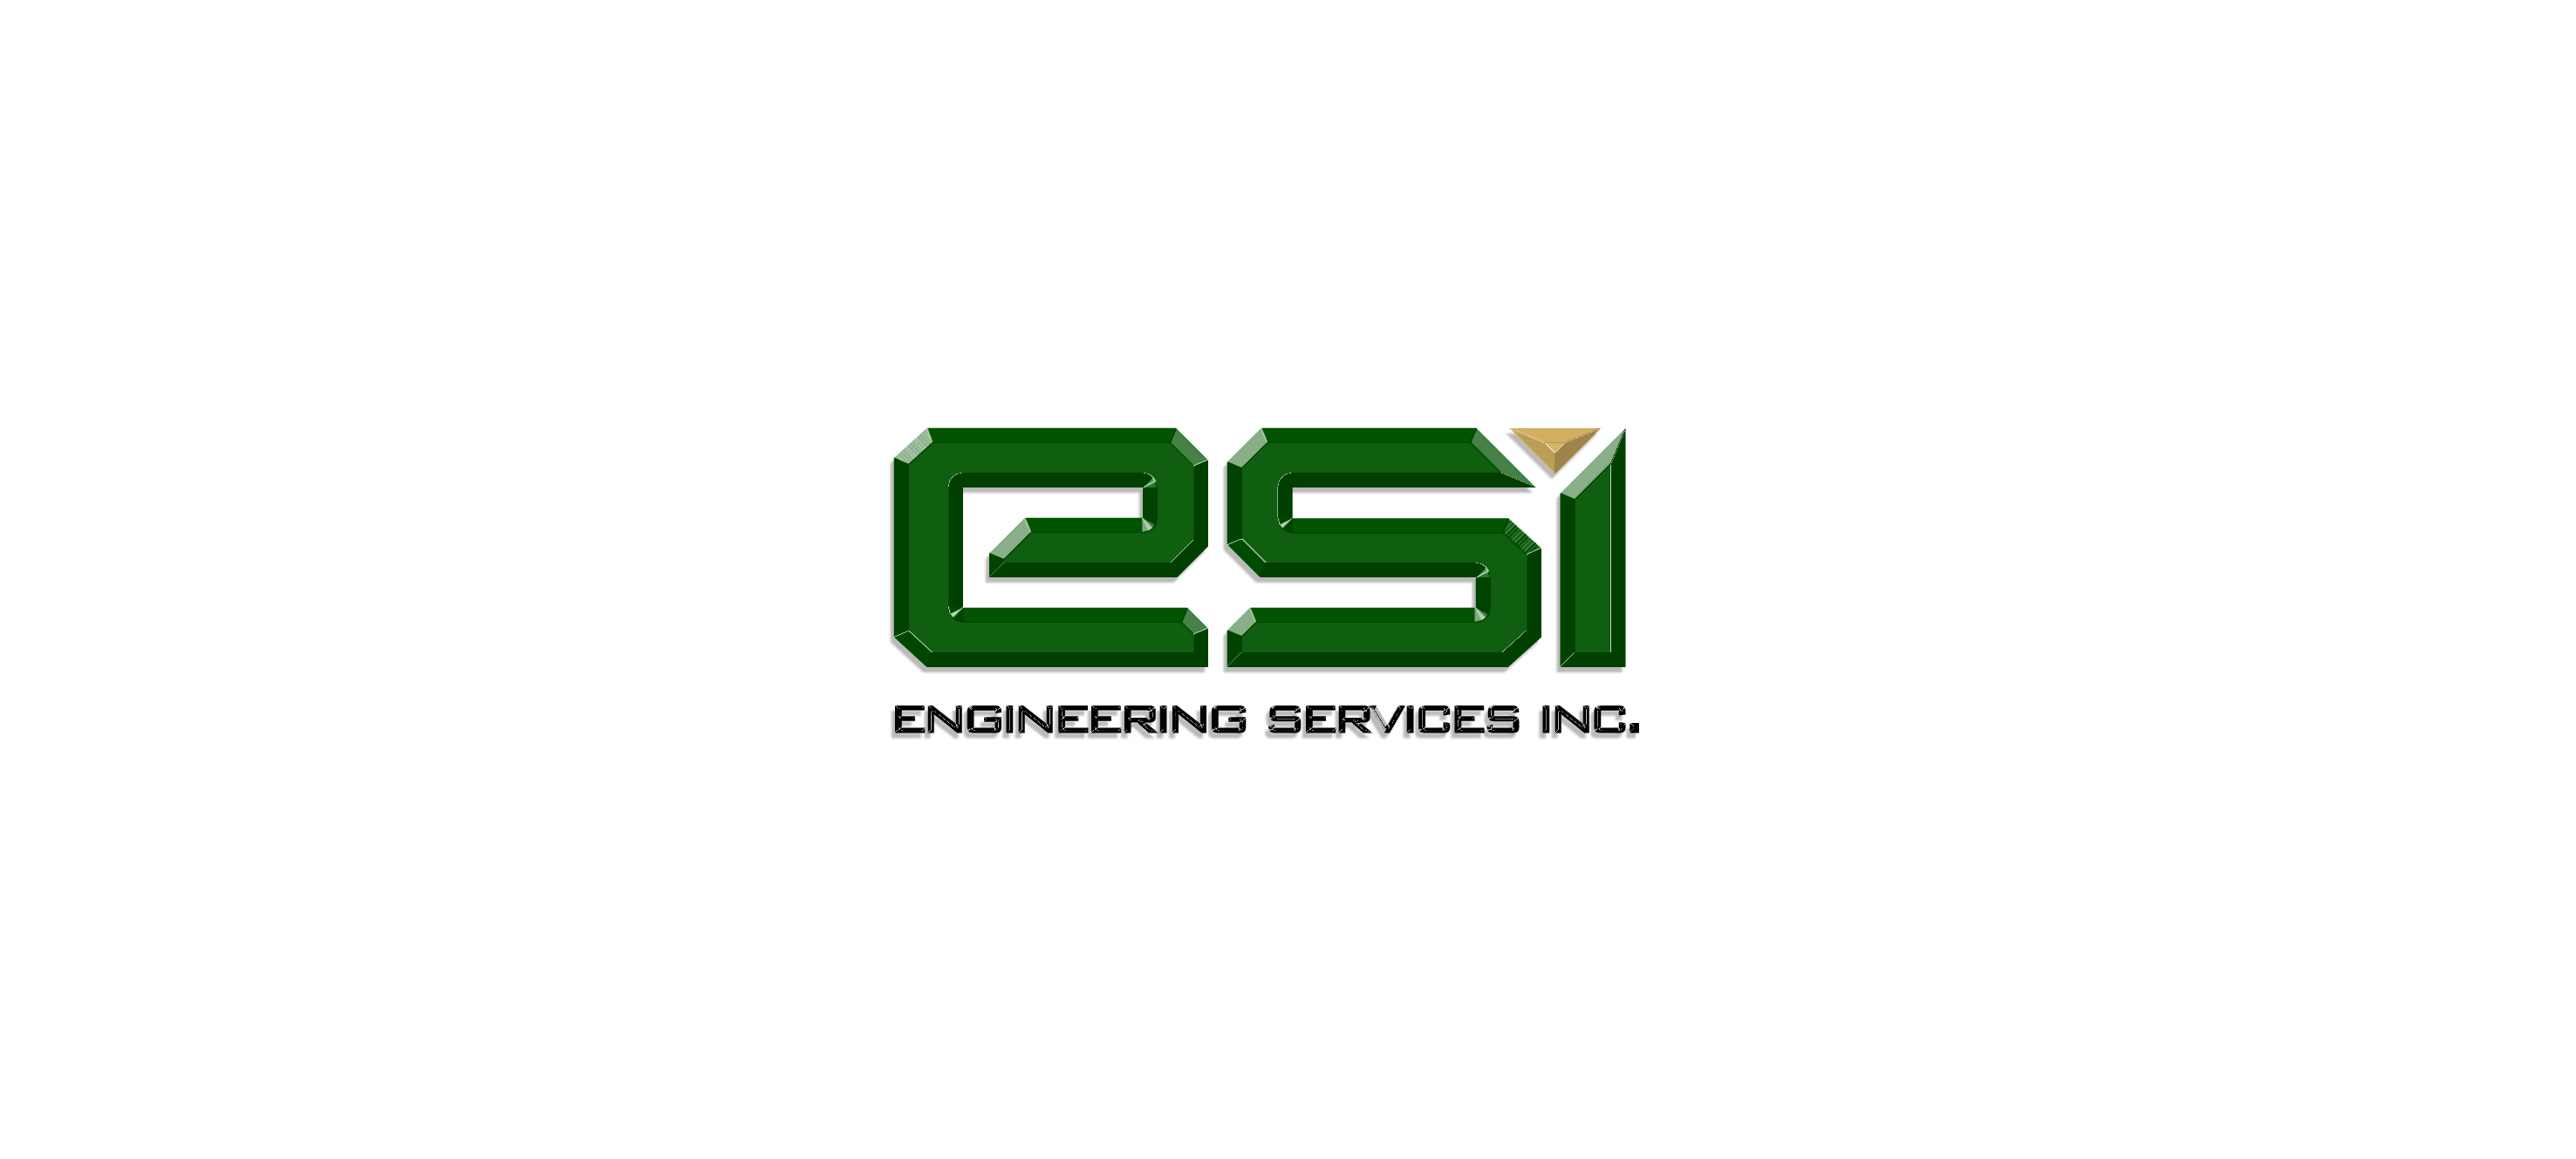 Engineering Services, Inc.